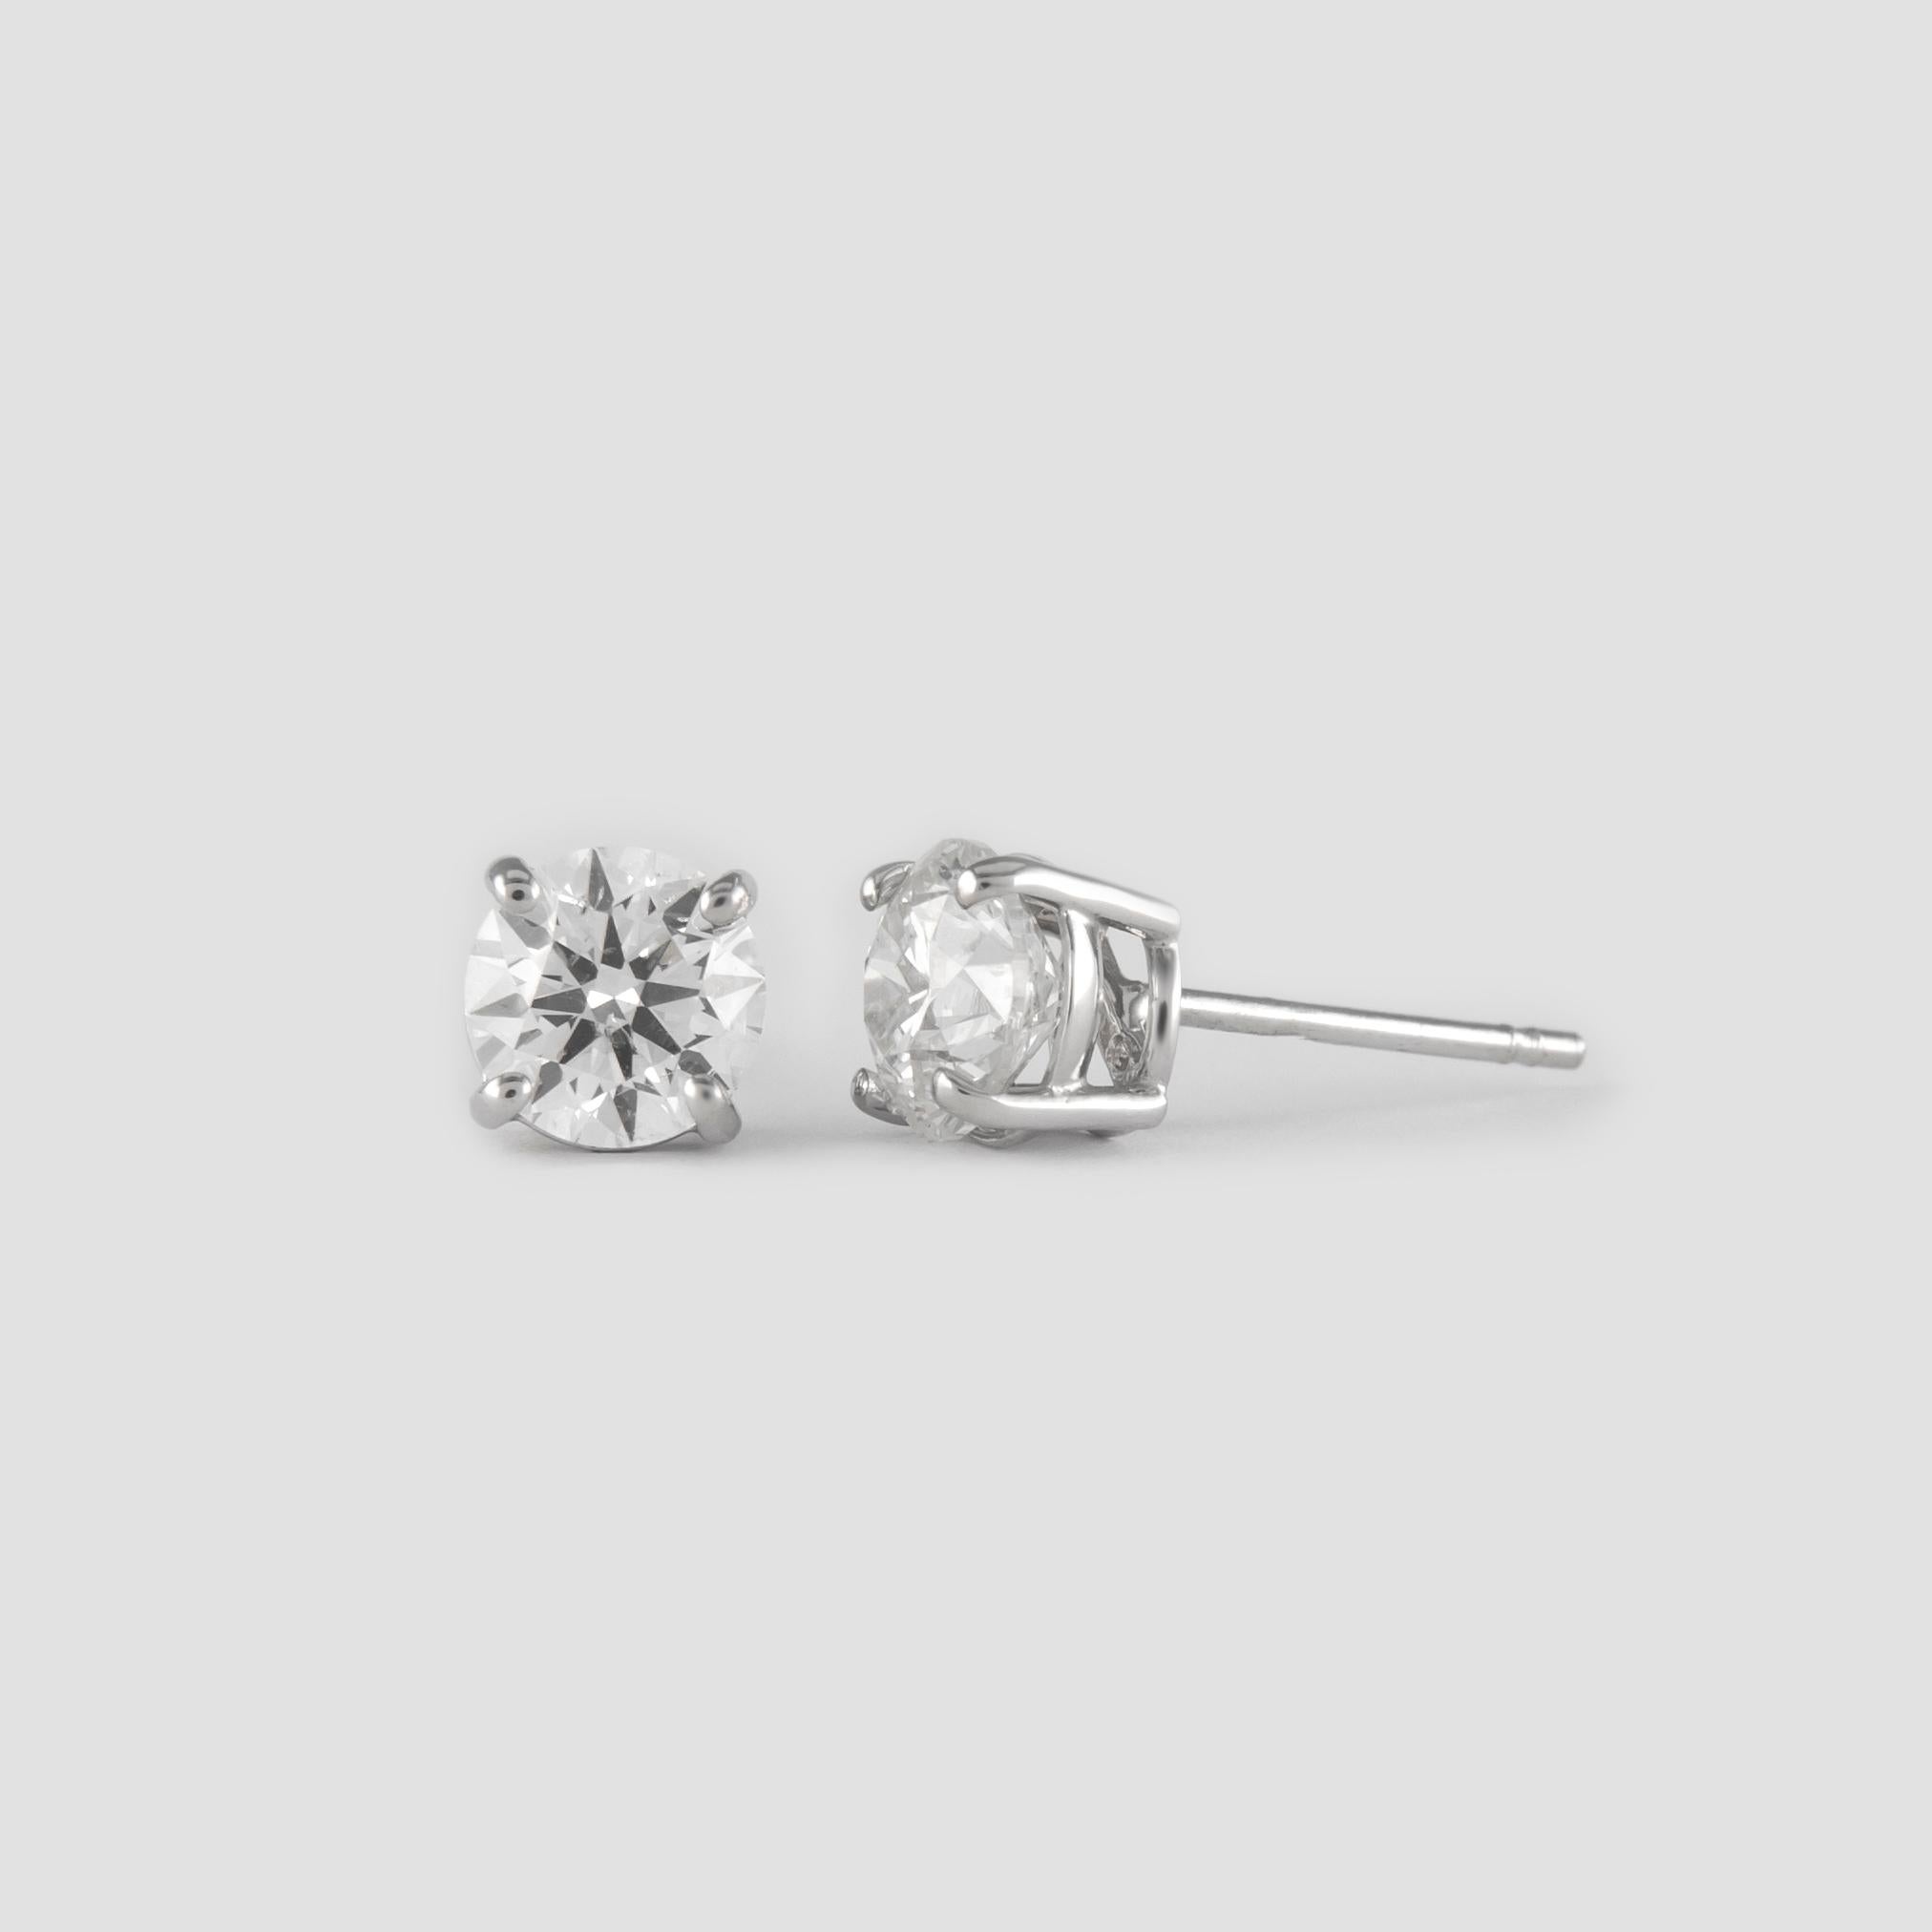 Classic diamond stud earrings. By Alexander of Beverly Hills.
Two round brilliant diamonds 1.46 carats total. Approximately G color and SI clarity. Four prong set, 14k white gold. 
Accommodated with an up to date appraisal by a GIA G.G., please